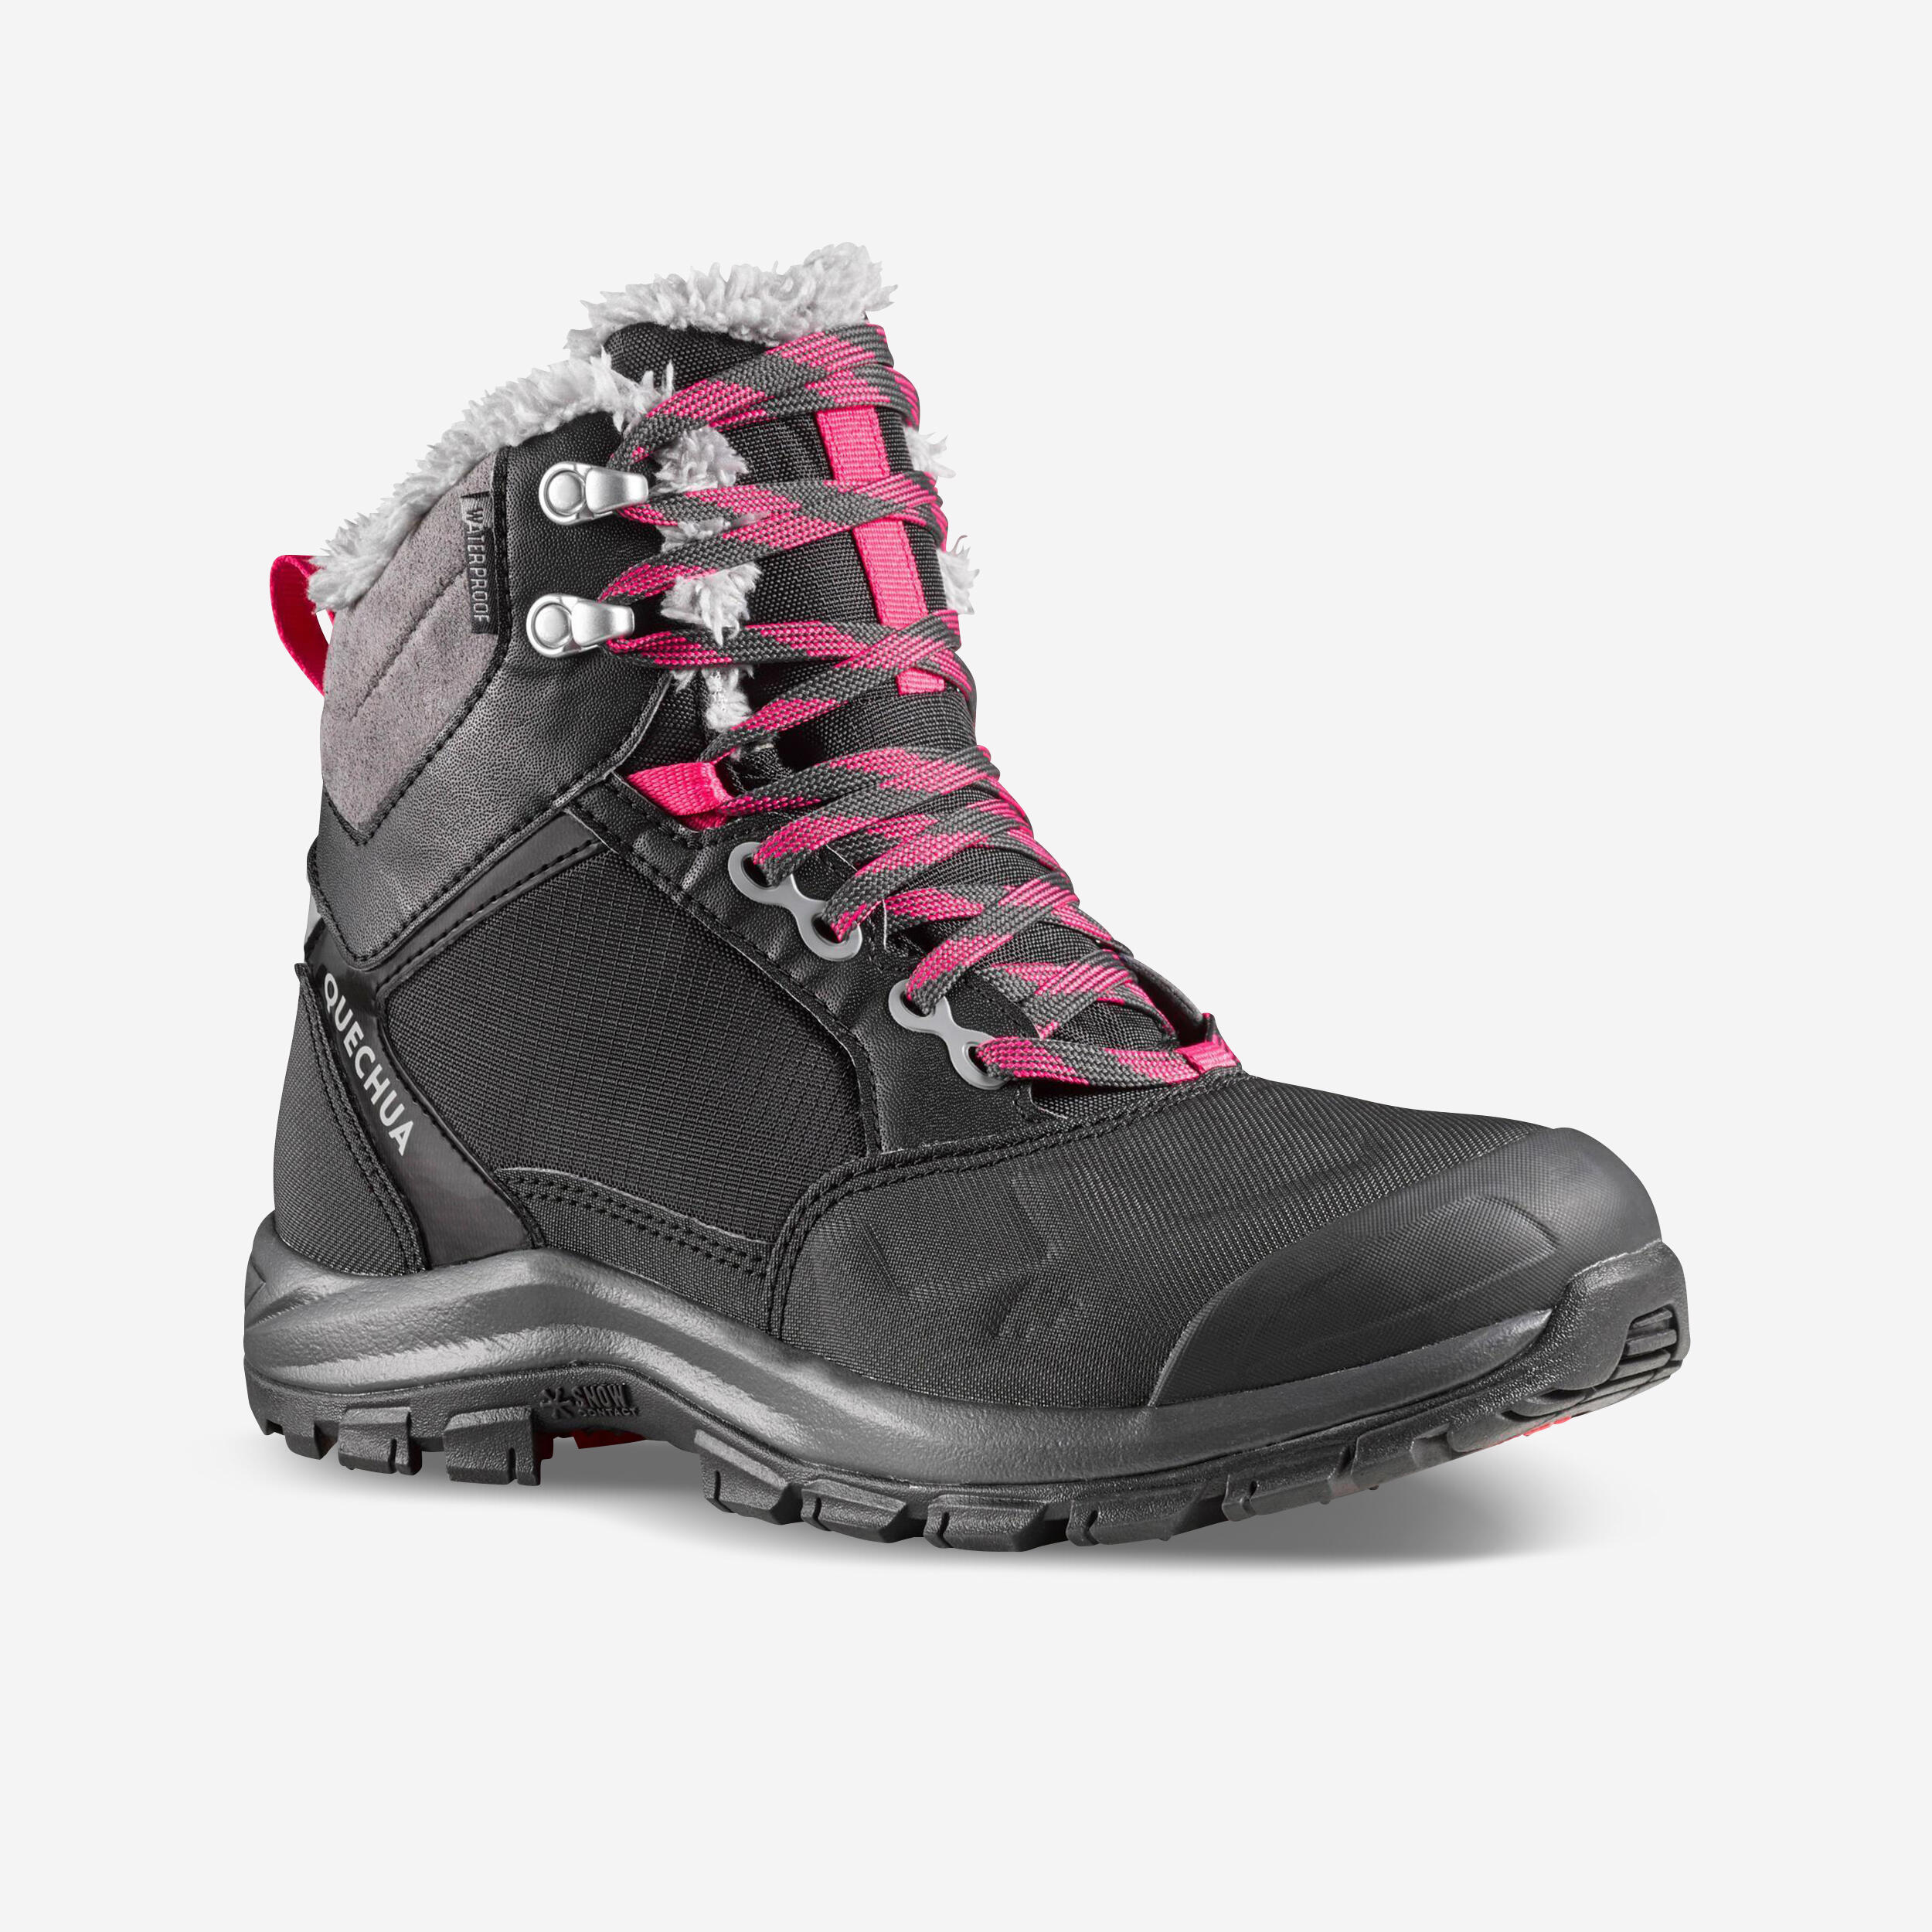 Women's Warm and Waterproof Hiking Boots - SH500 mountain MID 1/7